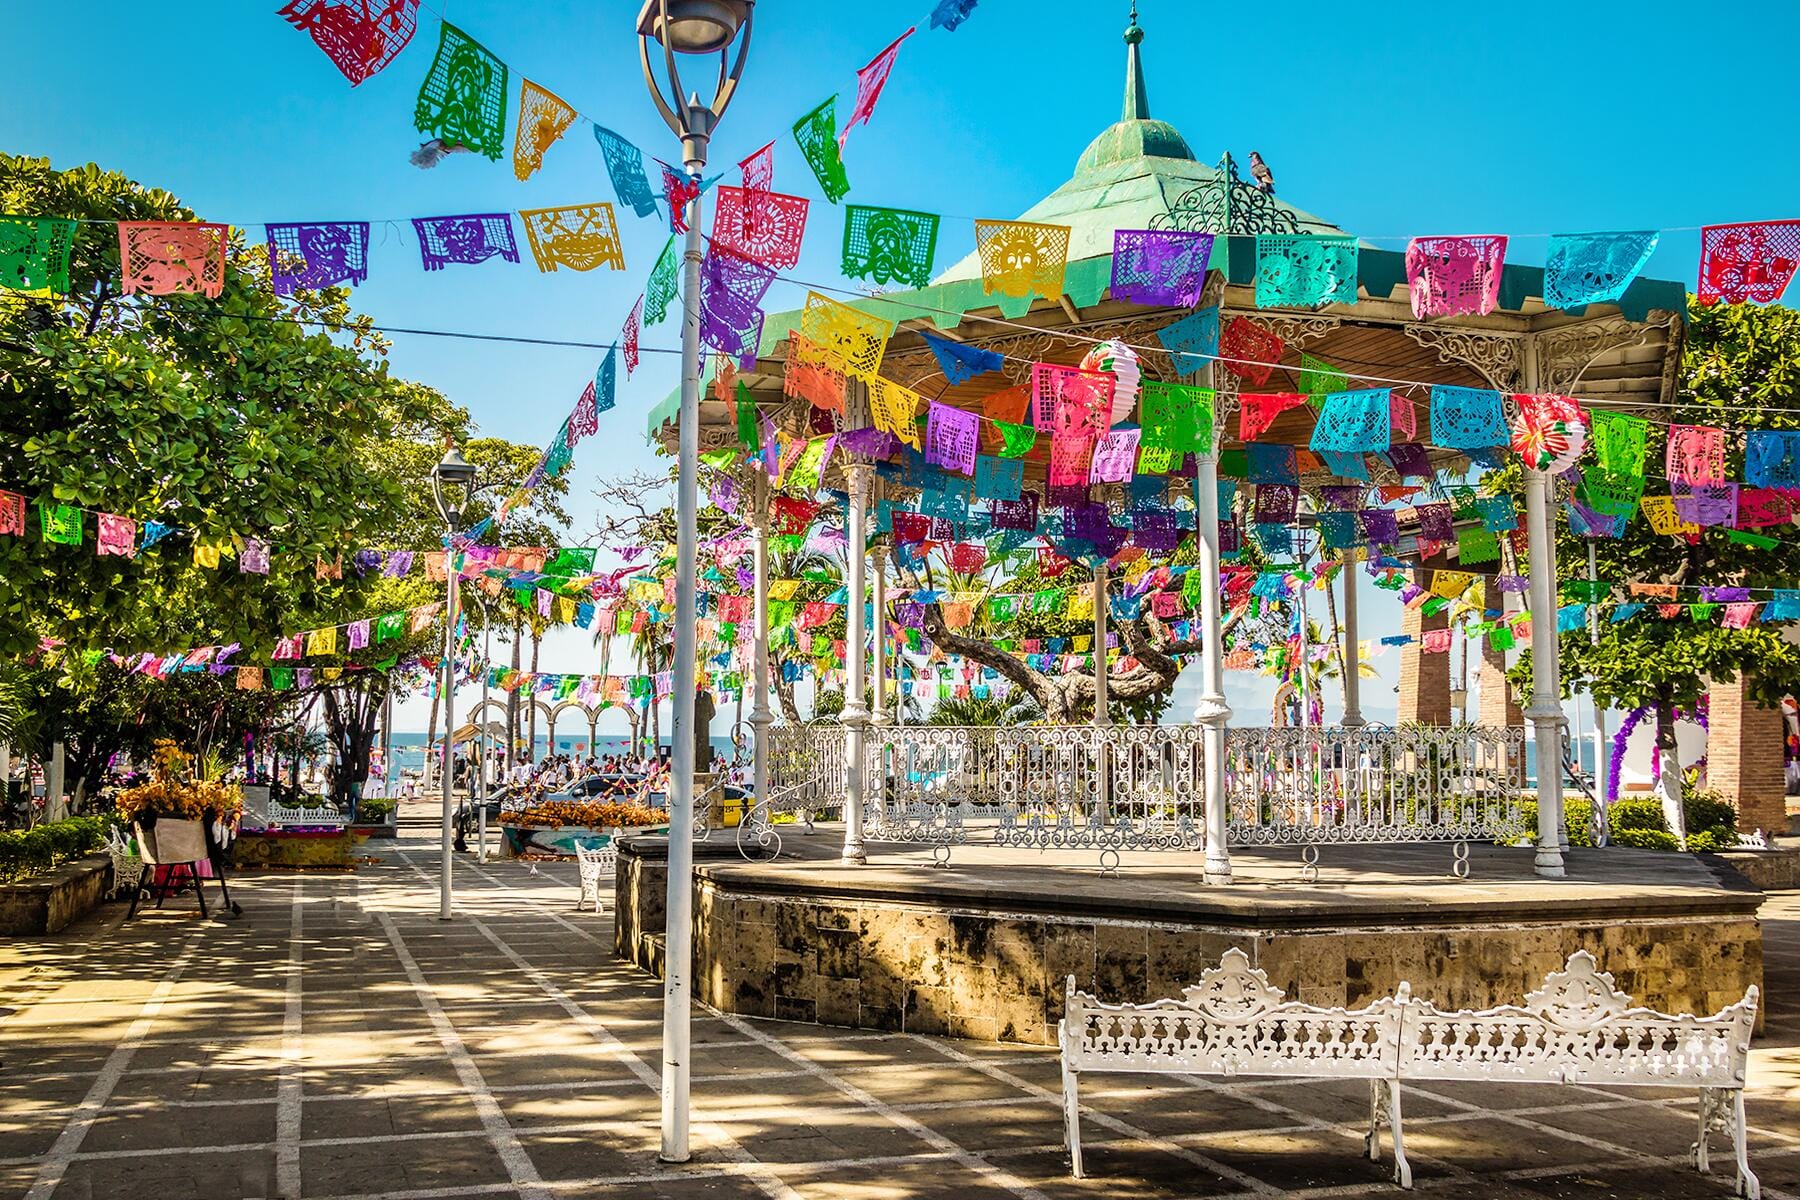 <a href='https://www.fodors.com/world/mexico-and-central-america/mexico/experiences/news/photos/overcrowded-or-overrated-destinations-in-mexico-and-where-to-go-instead#'>From &quot;Avoid These 5 Crowded Mexican Hotspots. Go Here Instead: Live Your Best LGBTQ+ Life in Puerto Vallarta Instead of Cancun&quot;</a>